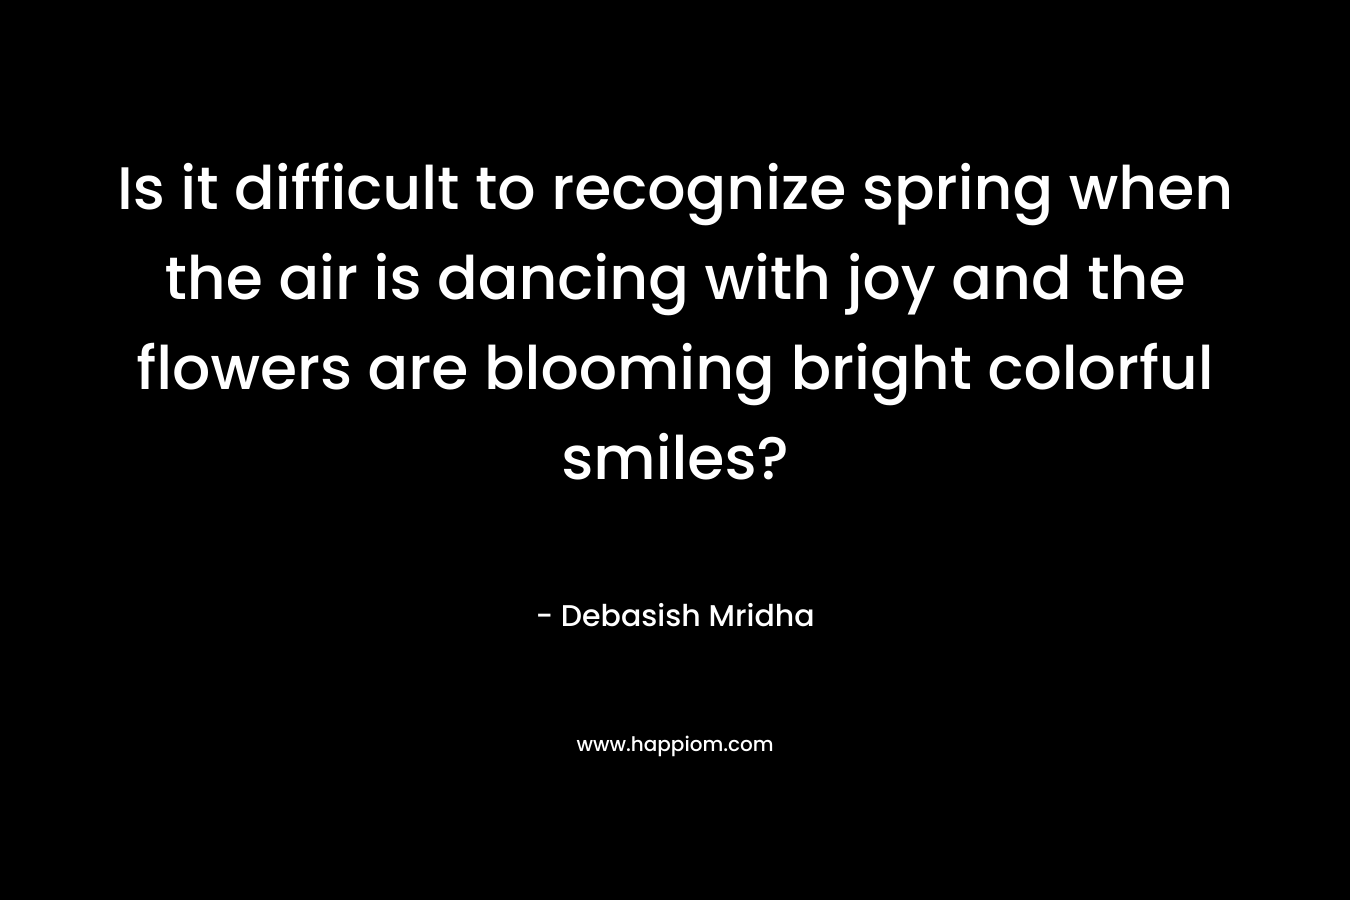 Is it difficult to recognize spring when the air is dancing with joy and the flowers are blooming bright colorful smiles? – Debasish Mridha